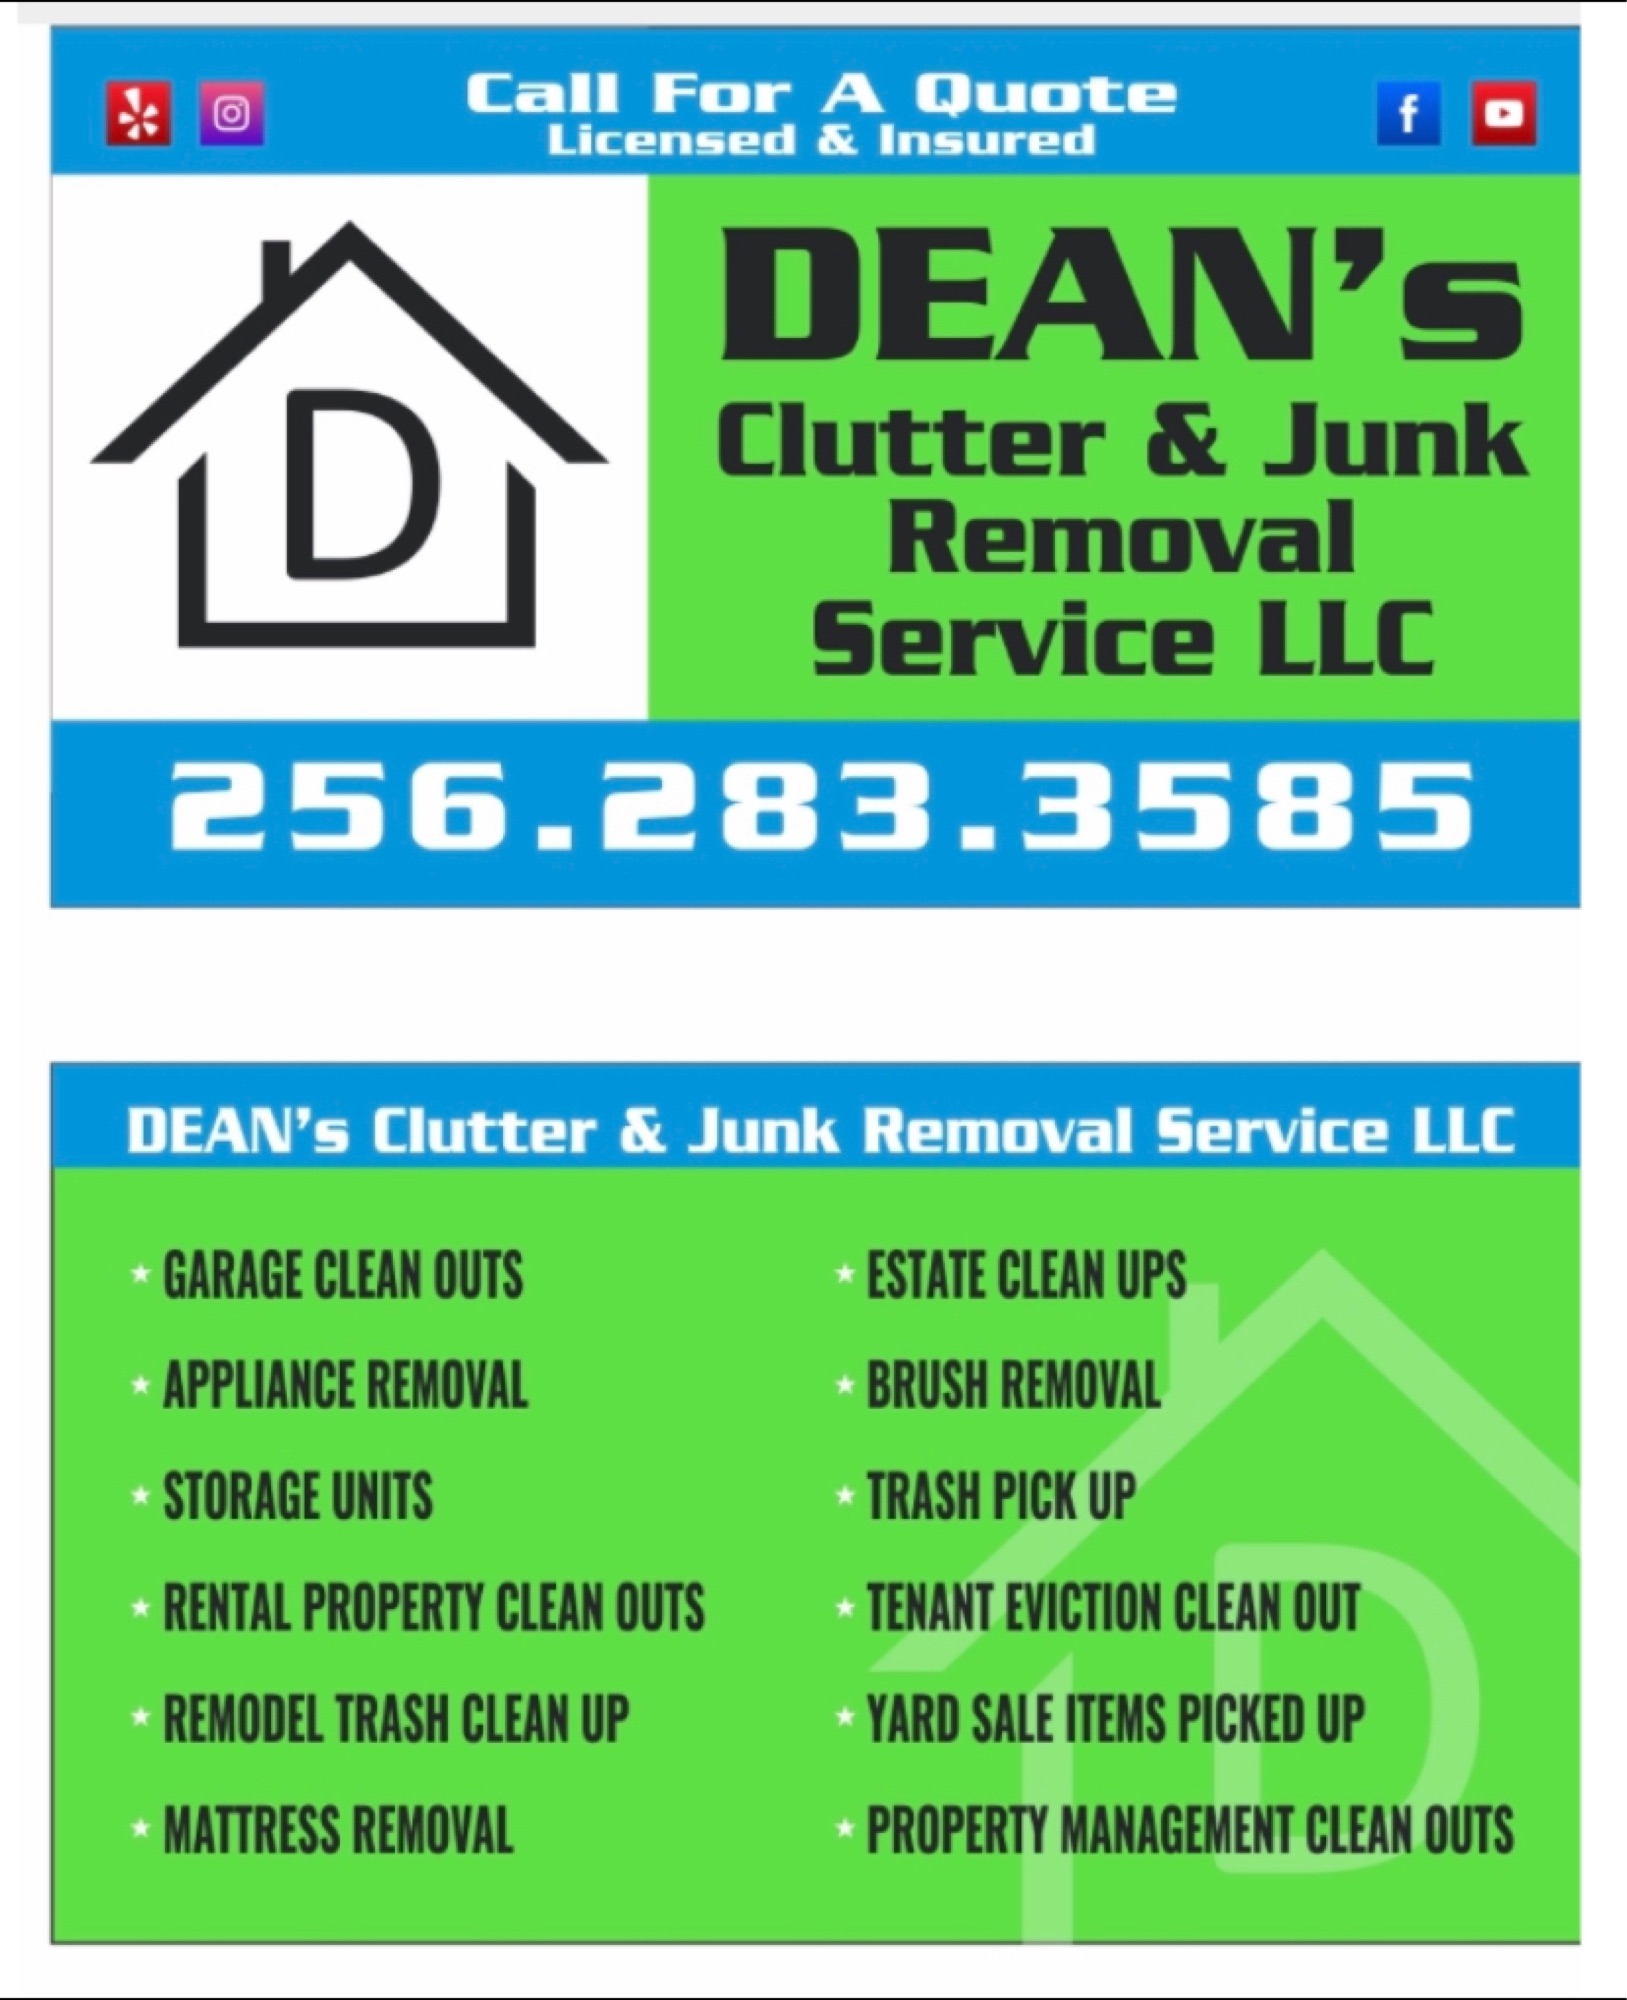 Dean's Clutter and Junk Removal Logo